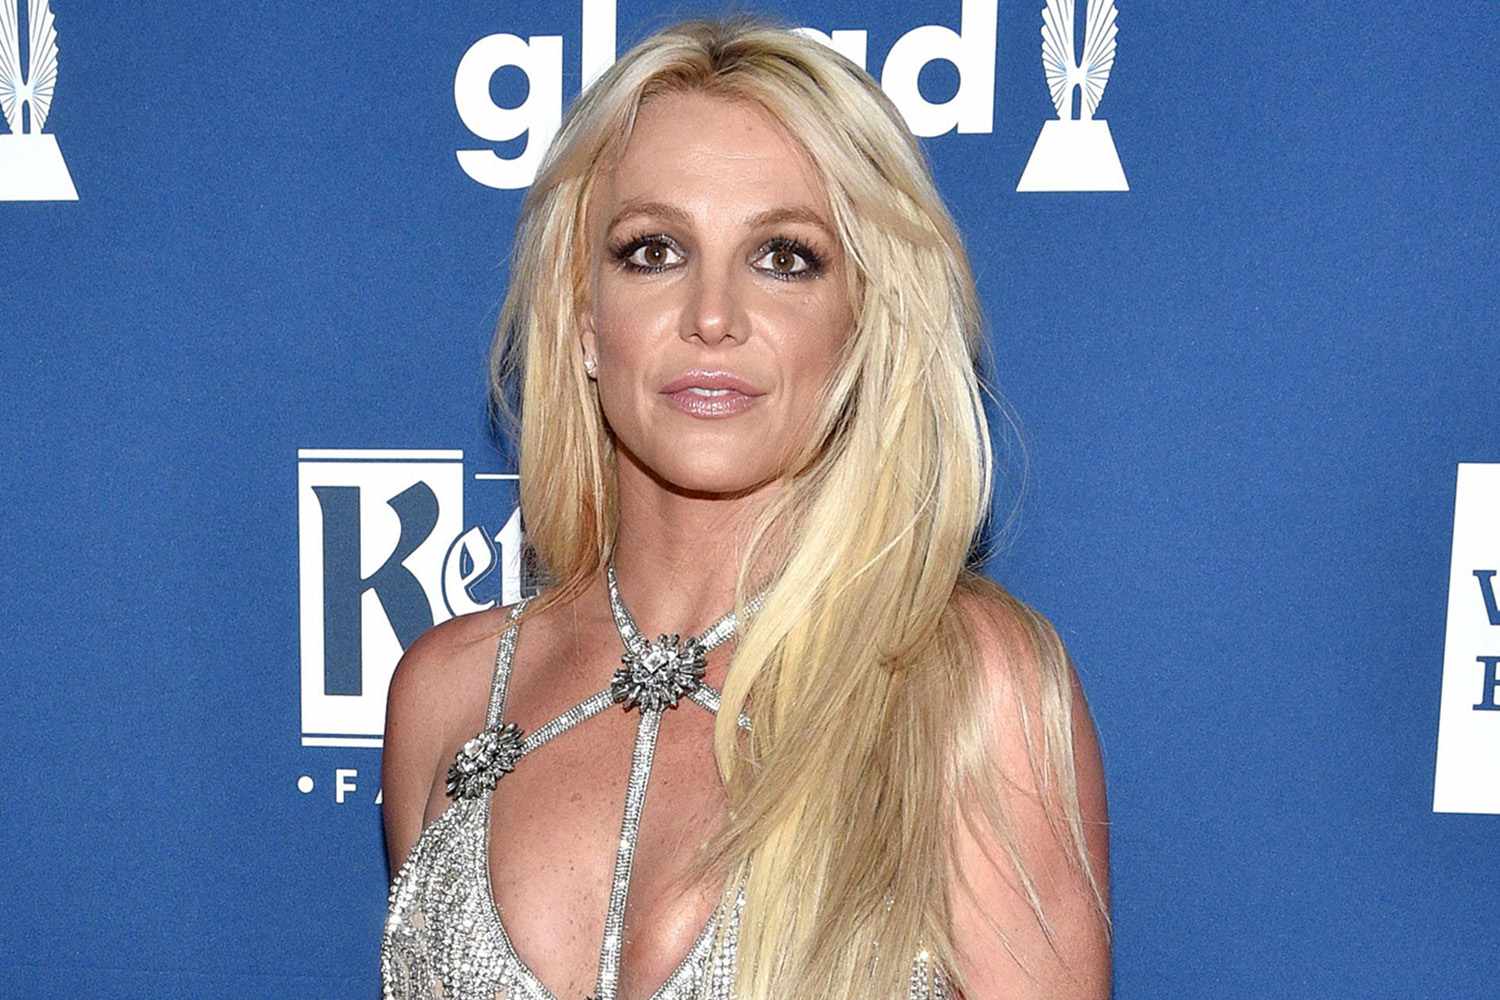 Britney Spears Says She Had ‘a False Confidence After My Divorce’ [Video]